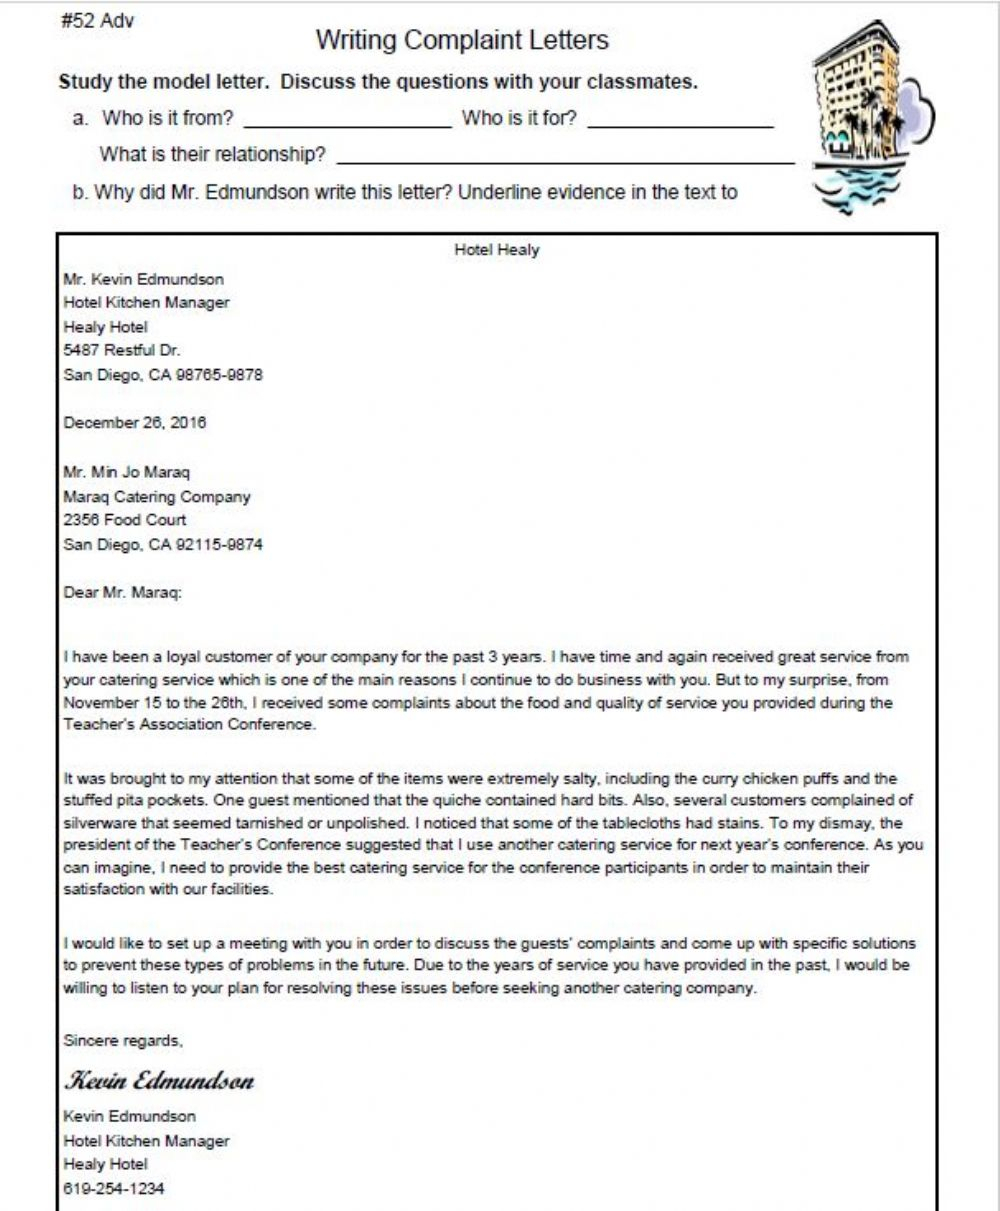 Writing Complaint Letters - Interactive Worksheet for Letter Writing Worksheets For Grade 5